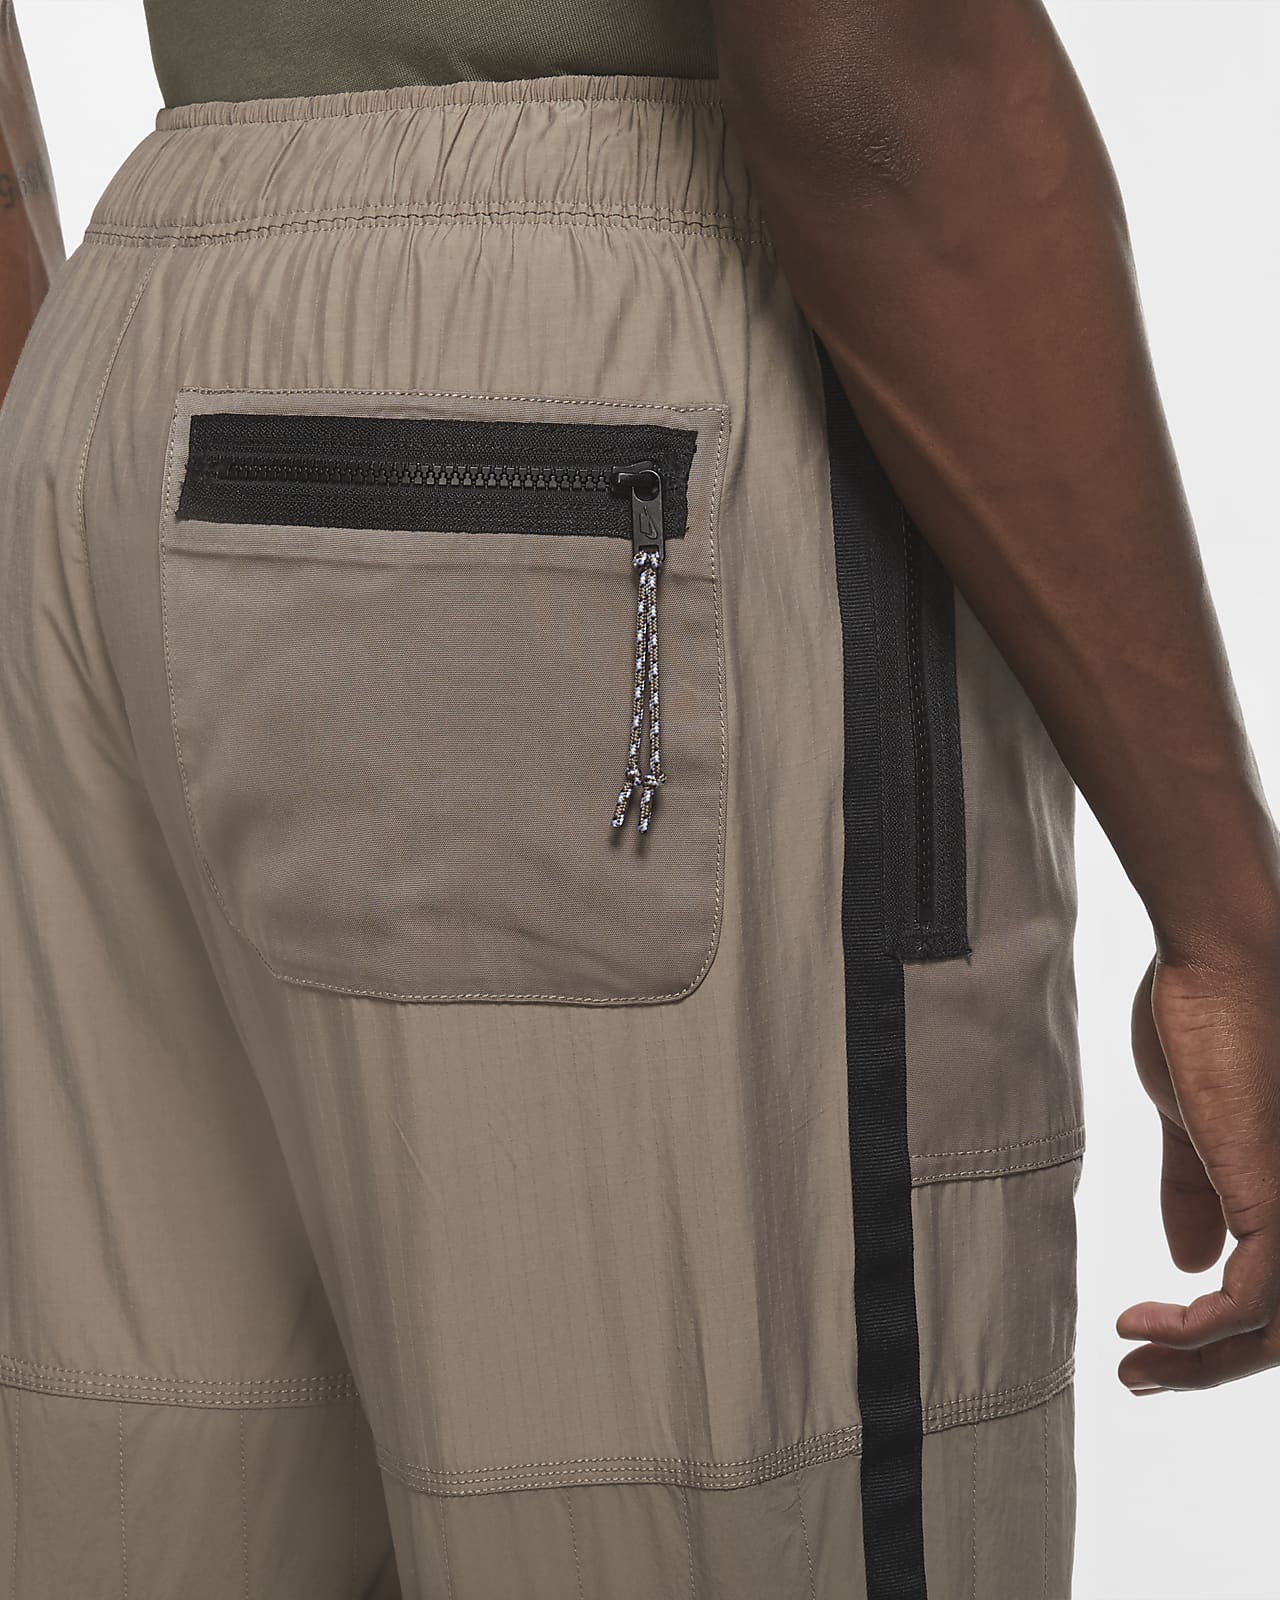 nike cargo woven track pants olive grey